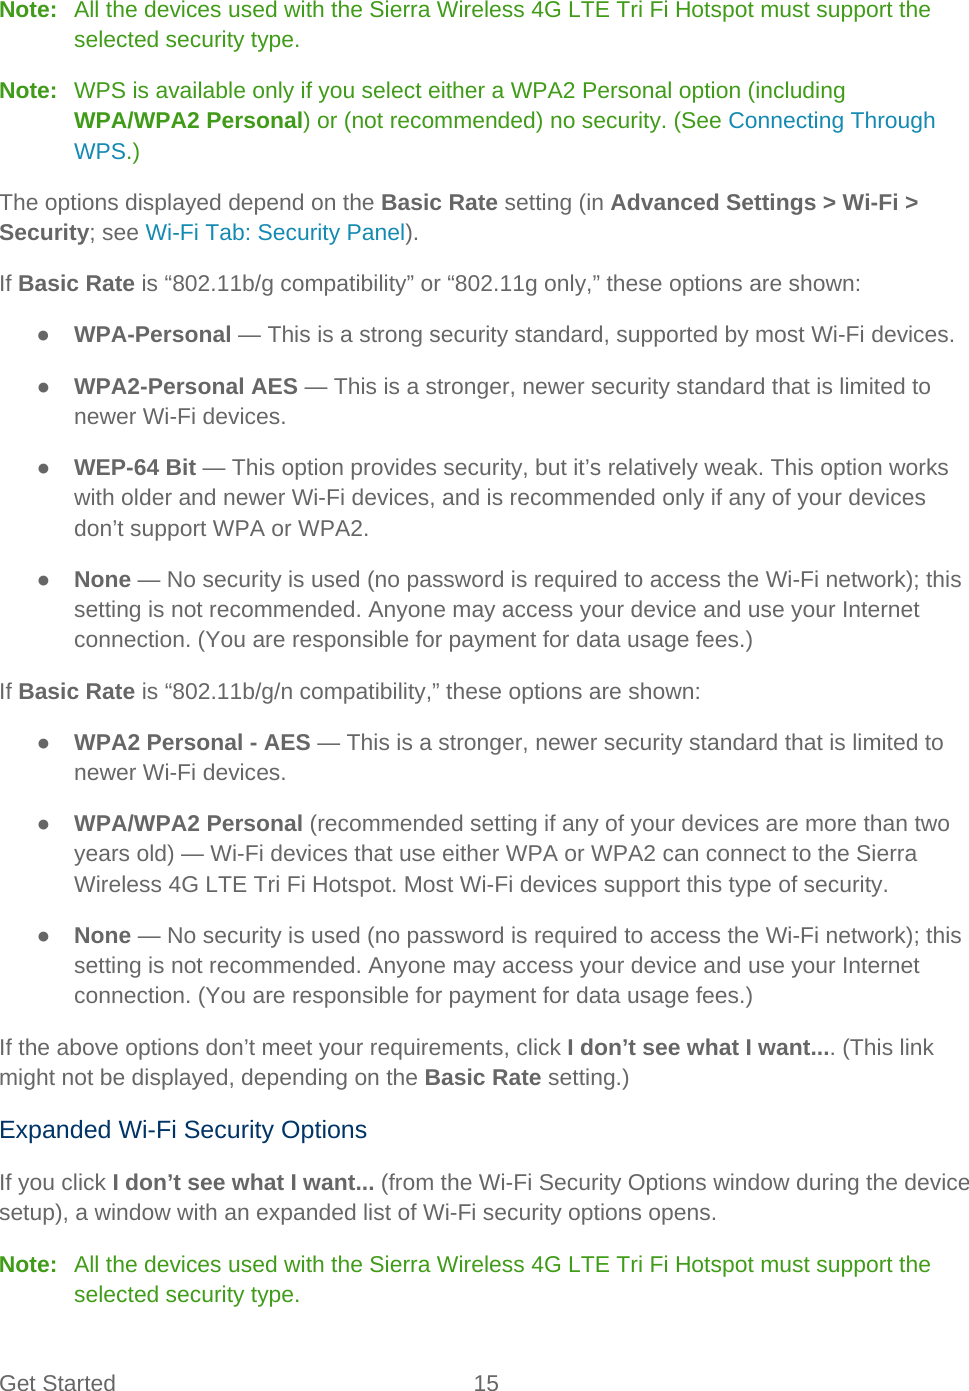 Get Started 15   Note:  All the devices used with the Sierra Wireless 4G LTE Tri Fi Hotspot must support the selected security type. Note:   WPS is available only if you select either a WPA2 Personal option (including WPA/WPA2 Personal) or (not recommended) no security. (See Connecting Through WPS.) The options displayed depend on the Basic Rate setting (in Advanced Settings &gt; Wi-Fi &gt; Security; see Wi-Fi Tab: Security Panel). If Basic Rate is “802.11b/g compatibility” or “802.11g only,” these options are shown: ● WPA-Personal — This is a strong security standard, supported by most Wi-Fi devices. ● WPA2-Personal AES — This is a stronger, newer security standard that is limited to newer Wi-Fi devices. ● WEP-64 Bit — This option provides security, but it’s relatively weak. This option works with older and newer Wi-Fi devices, and is recommended only if any of your devices don’t support WPA or WPA2. ● None — No security is used (no password is required to access the Wi-Fi network); this setting is not recommended. Anyone may access your device and use your Internet connection. (You are responsible for payment for data usage fees.) If Basic Rate is “802.11b/g/n compatibility,” these options are shown: ● WPA2 Personal - AES — This is a stronger, newer security standard that is limited to newer Wi-Fi devices. ● WPA/WPA2 Personal (recommended setting if any of your devices are more than two years old) — Wi-Fi devices that use either WPA or WPA2 can connect to the Sierra Wireless 4G LTE Tri Fi Hotspot. Most Wi-Fi devices support this type of security. ● None — No security is used (no password is required to access the Wi-Fi network); this setting is not recommended. Anyone may access your device and use your Internet connection. (You are responsible for payment for data usage fees.) If the above options don’t meet your requirements, click I don’t see what I want.... (This link might not be displayed, depending on the Basic Rate setting.) Expanded Wi-Fi Security Options If you click I don’t see what I want... (from the Wi-Fi Security Options window during the device setup), a window with an expanded list of Wi-Fi security options opens. Note:   All the devices used with the Sierra Wireless 4G LTE Tri Fi Hotspot must support the selected security type. 